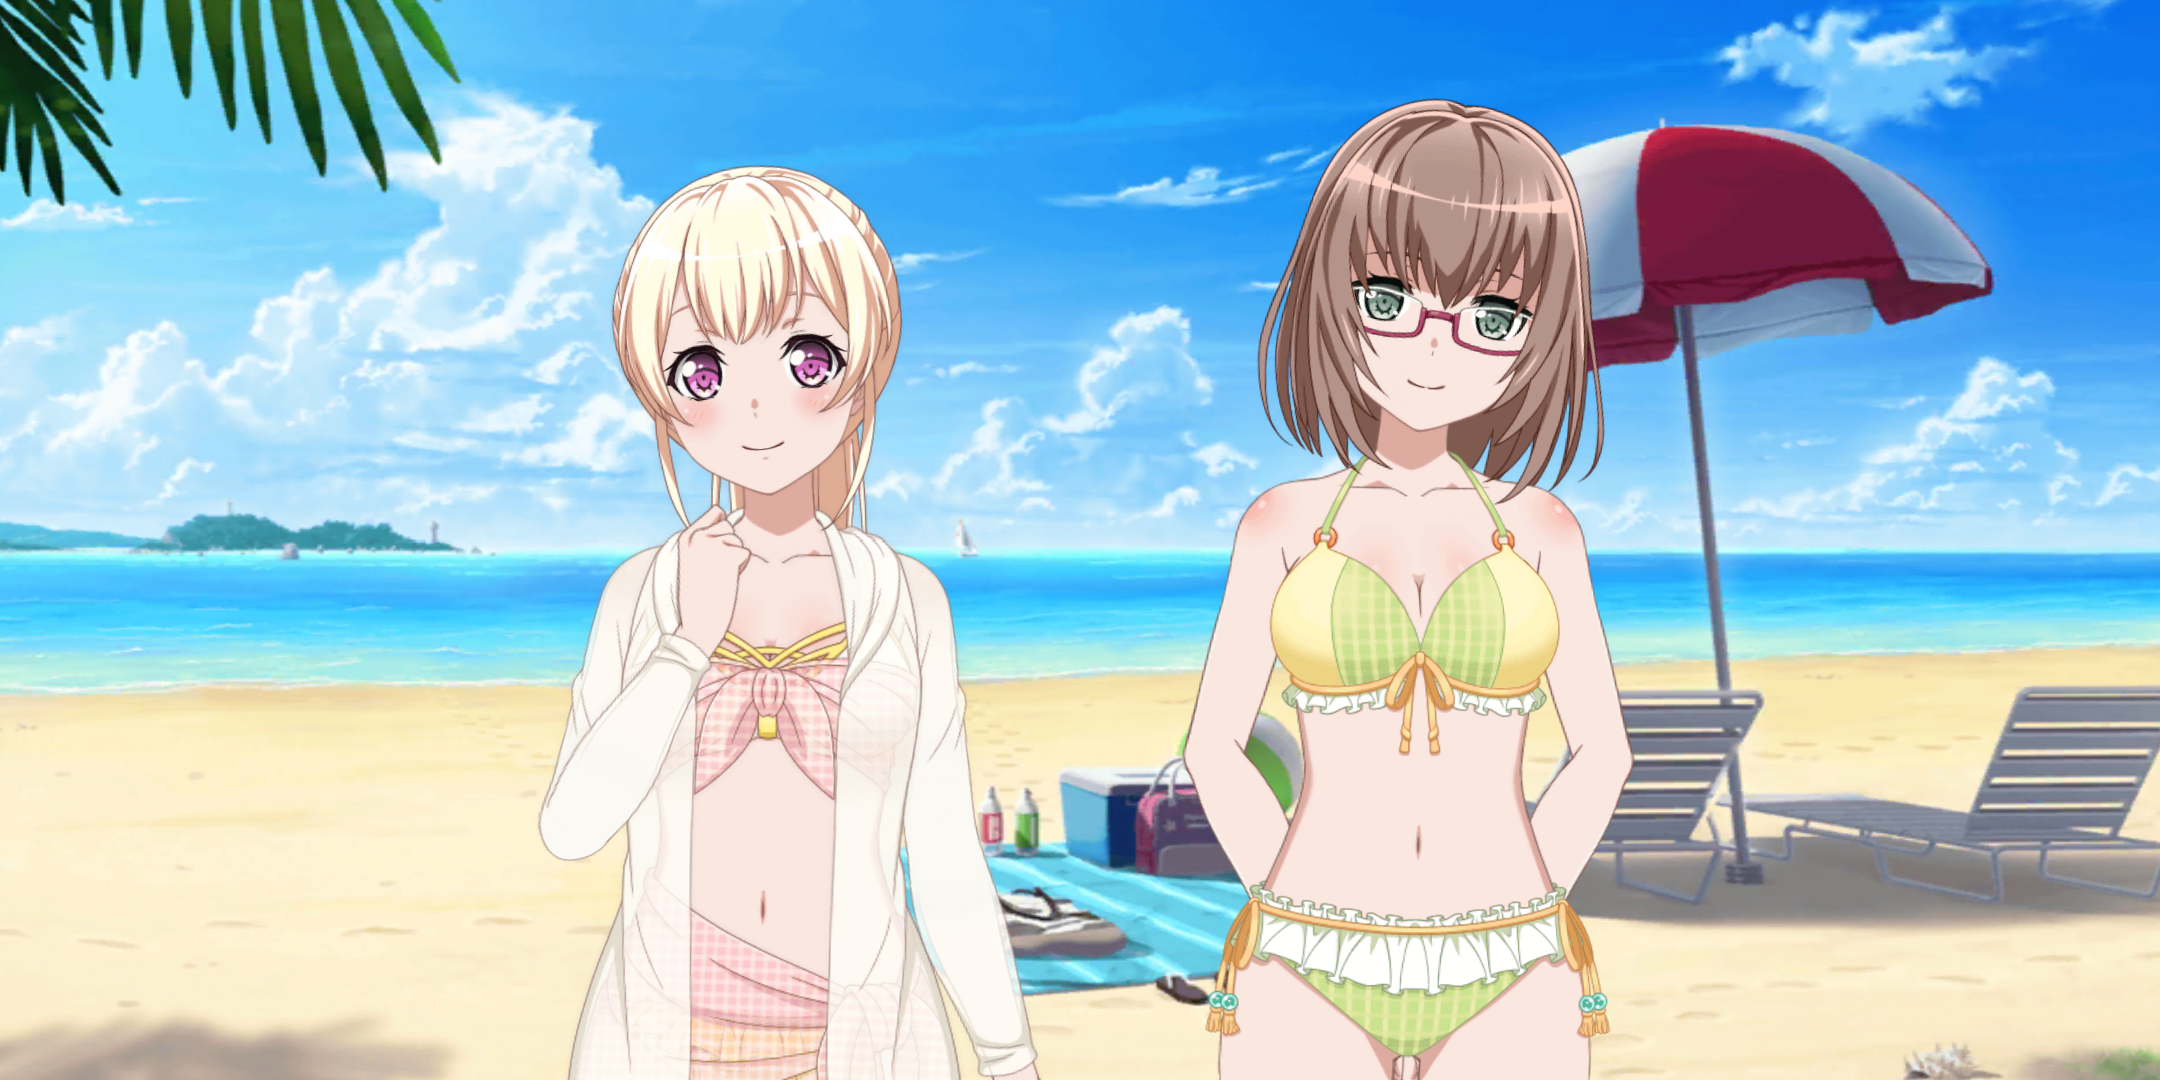 BanG Dream Girls Band Party - It's Swimsuit season! 👙 Check out